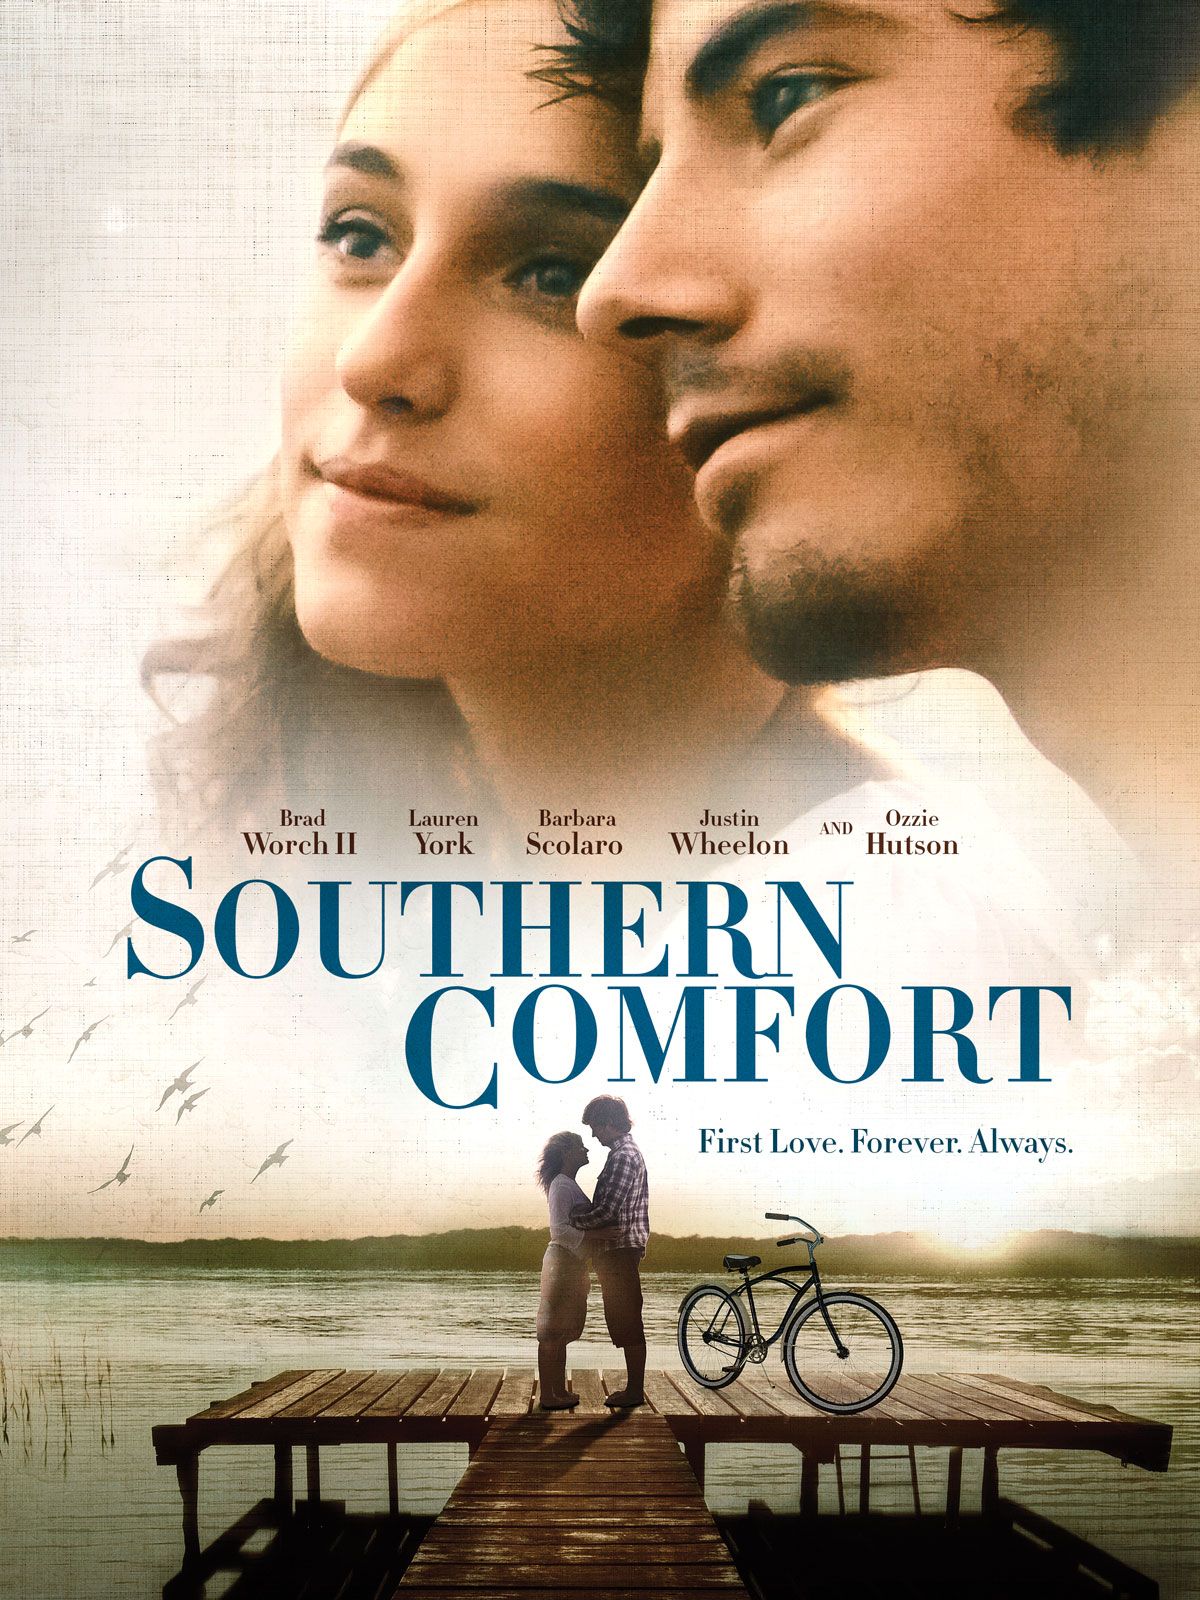 Keyart for the movie Southern Comfort